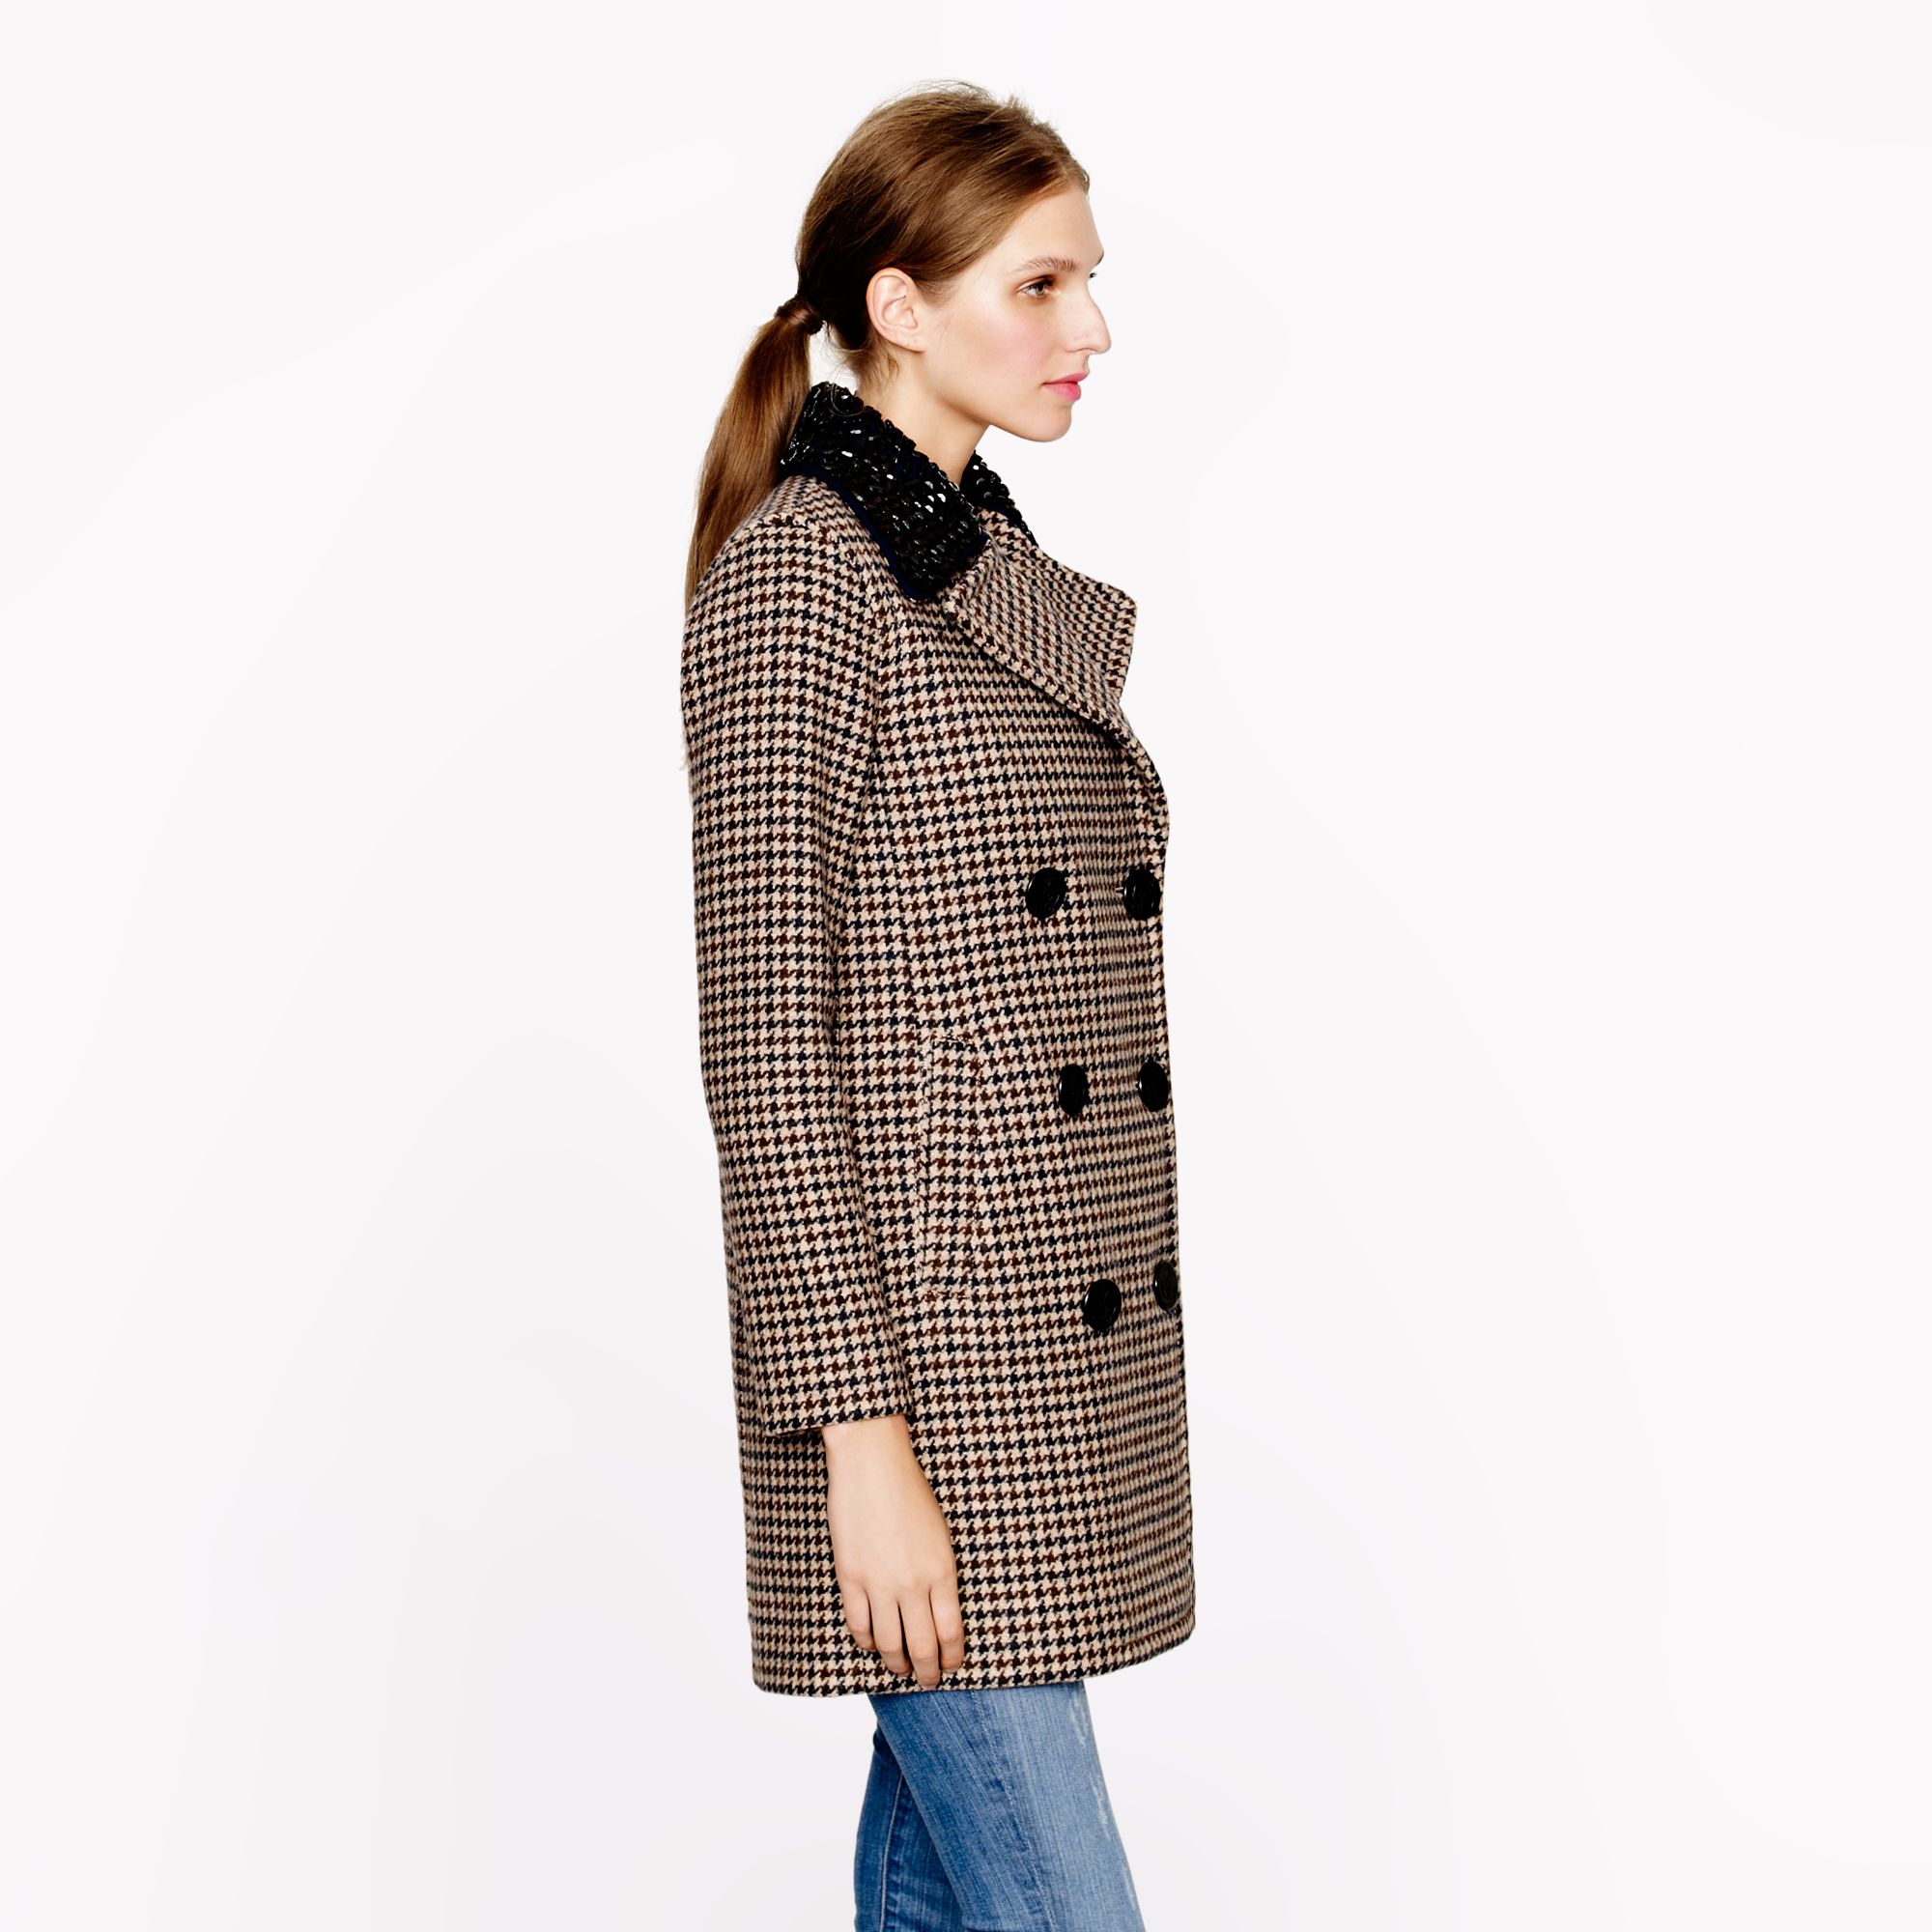 Lyst - J.Crew Captain Coat in Jeweled Houndstooth in Brown